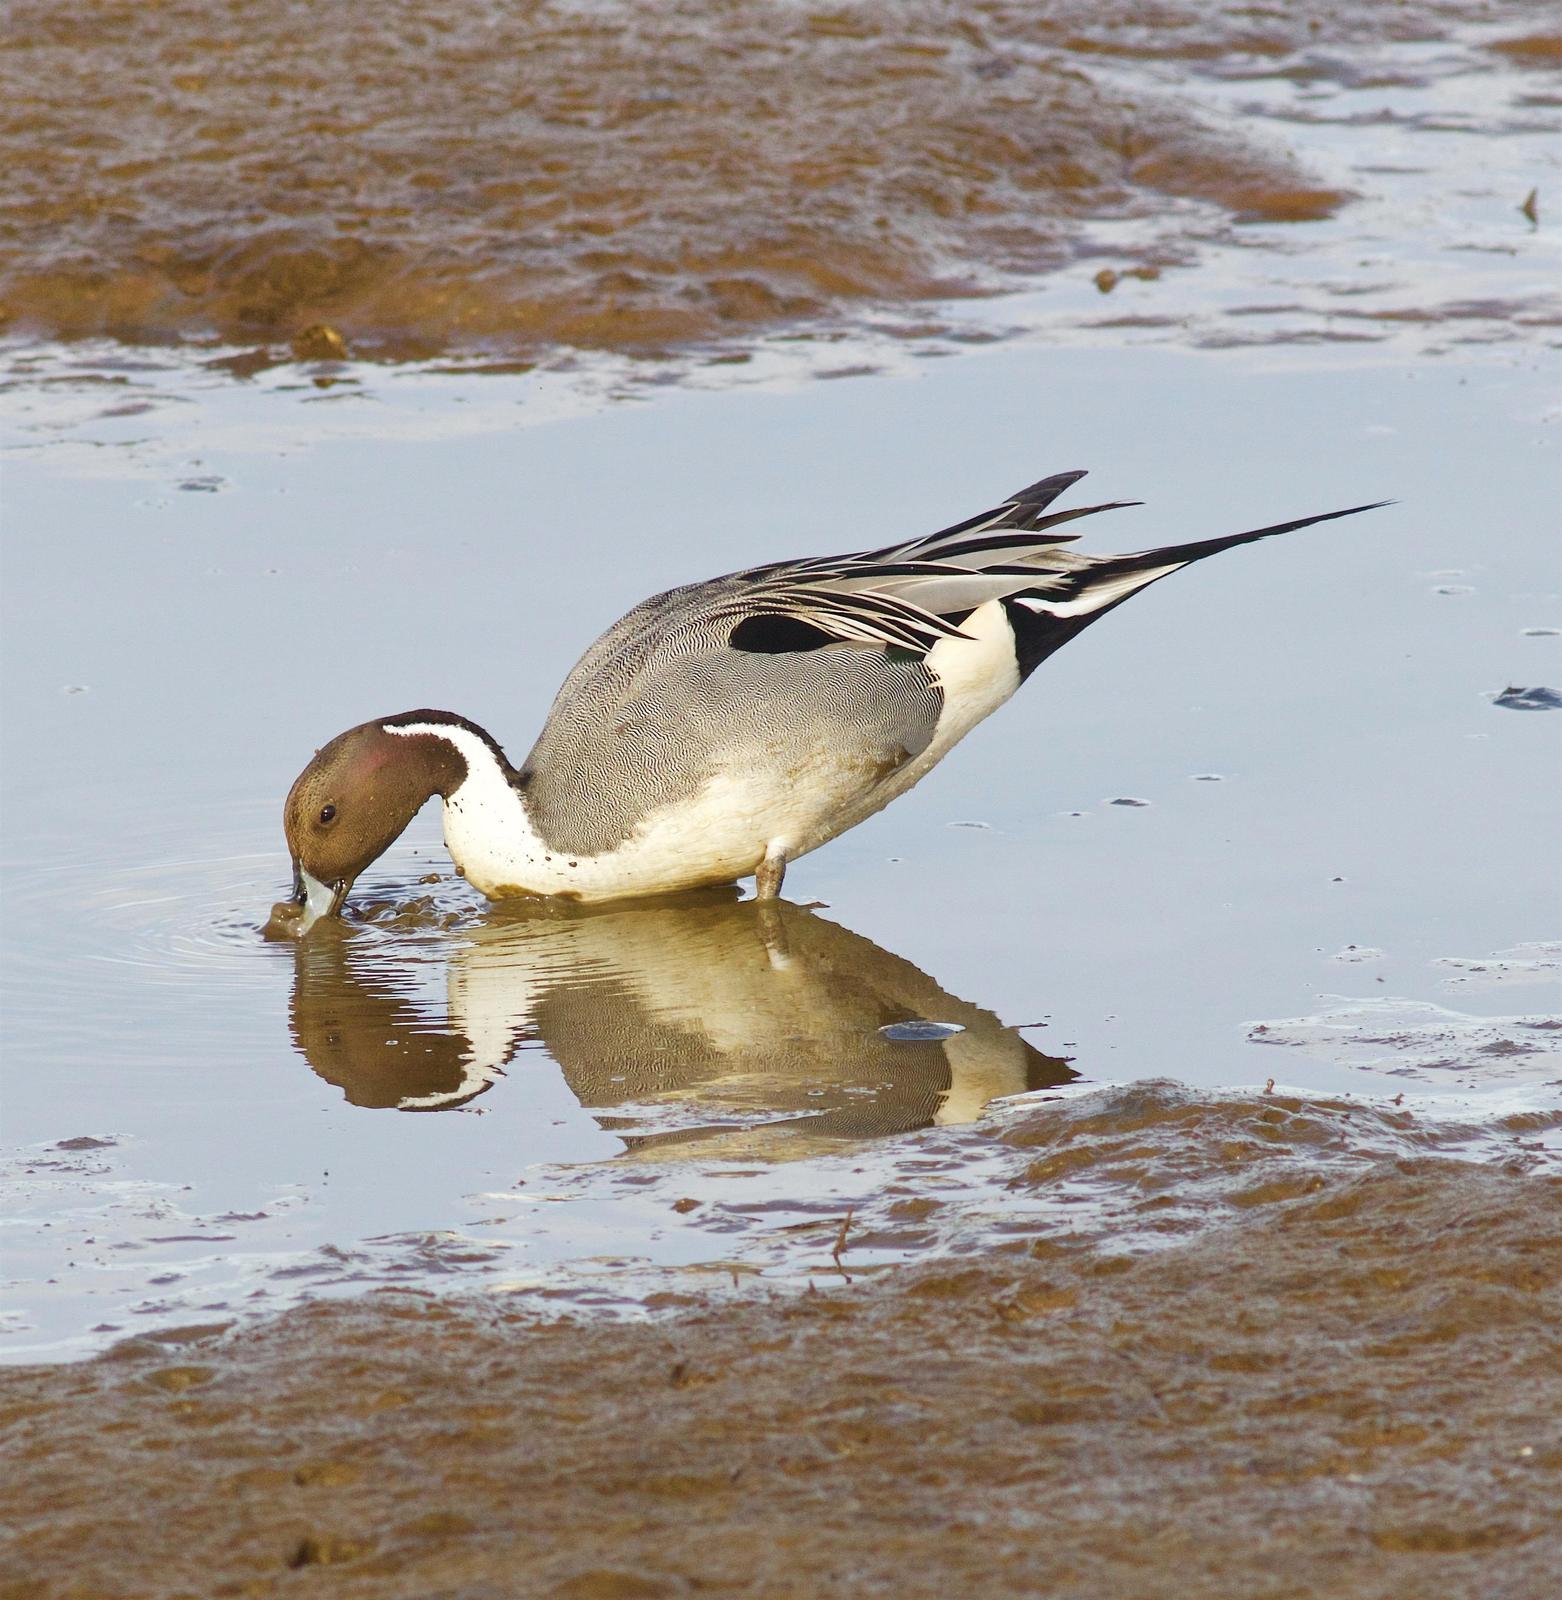 Northern Pintail Photo by Kathryn Keith